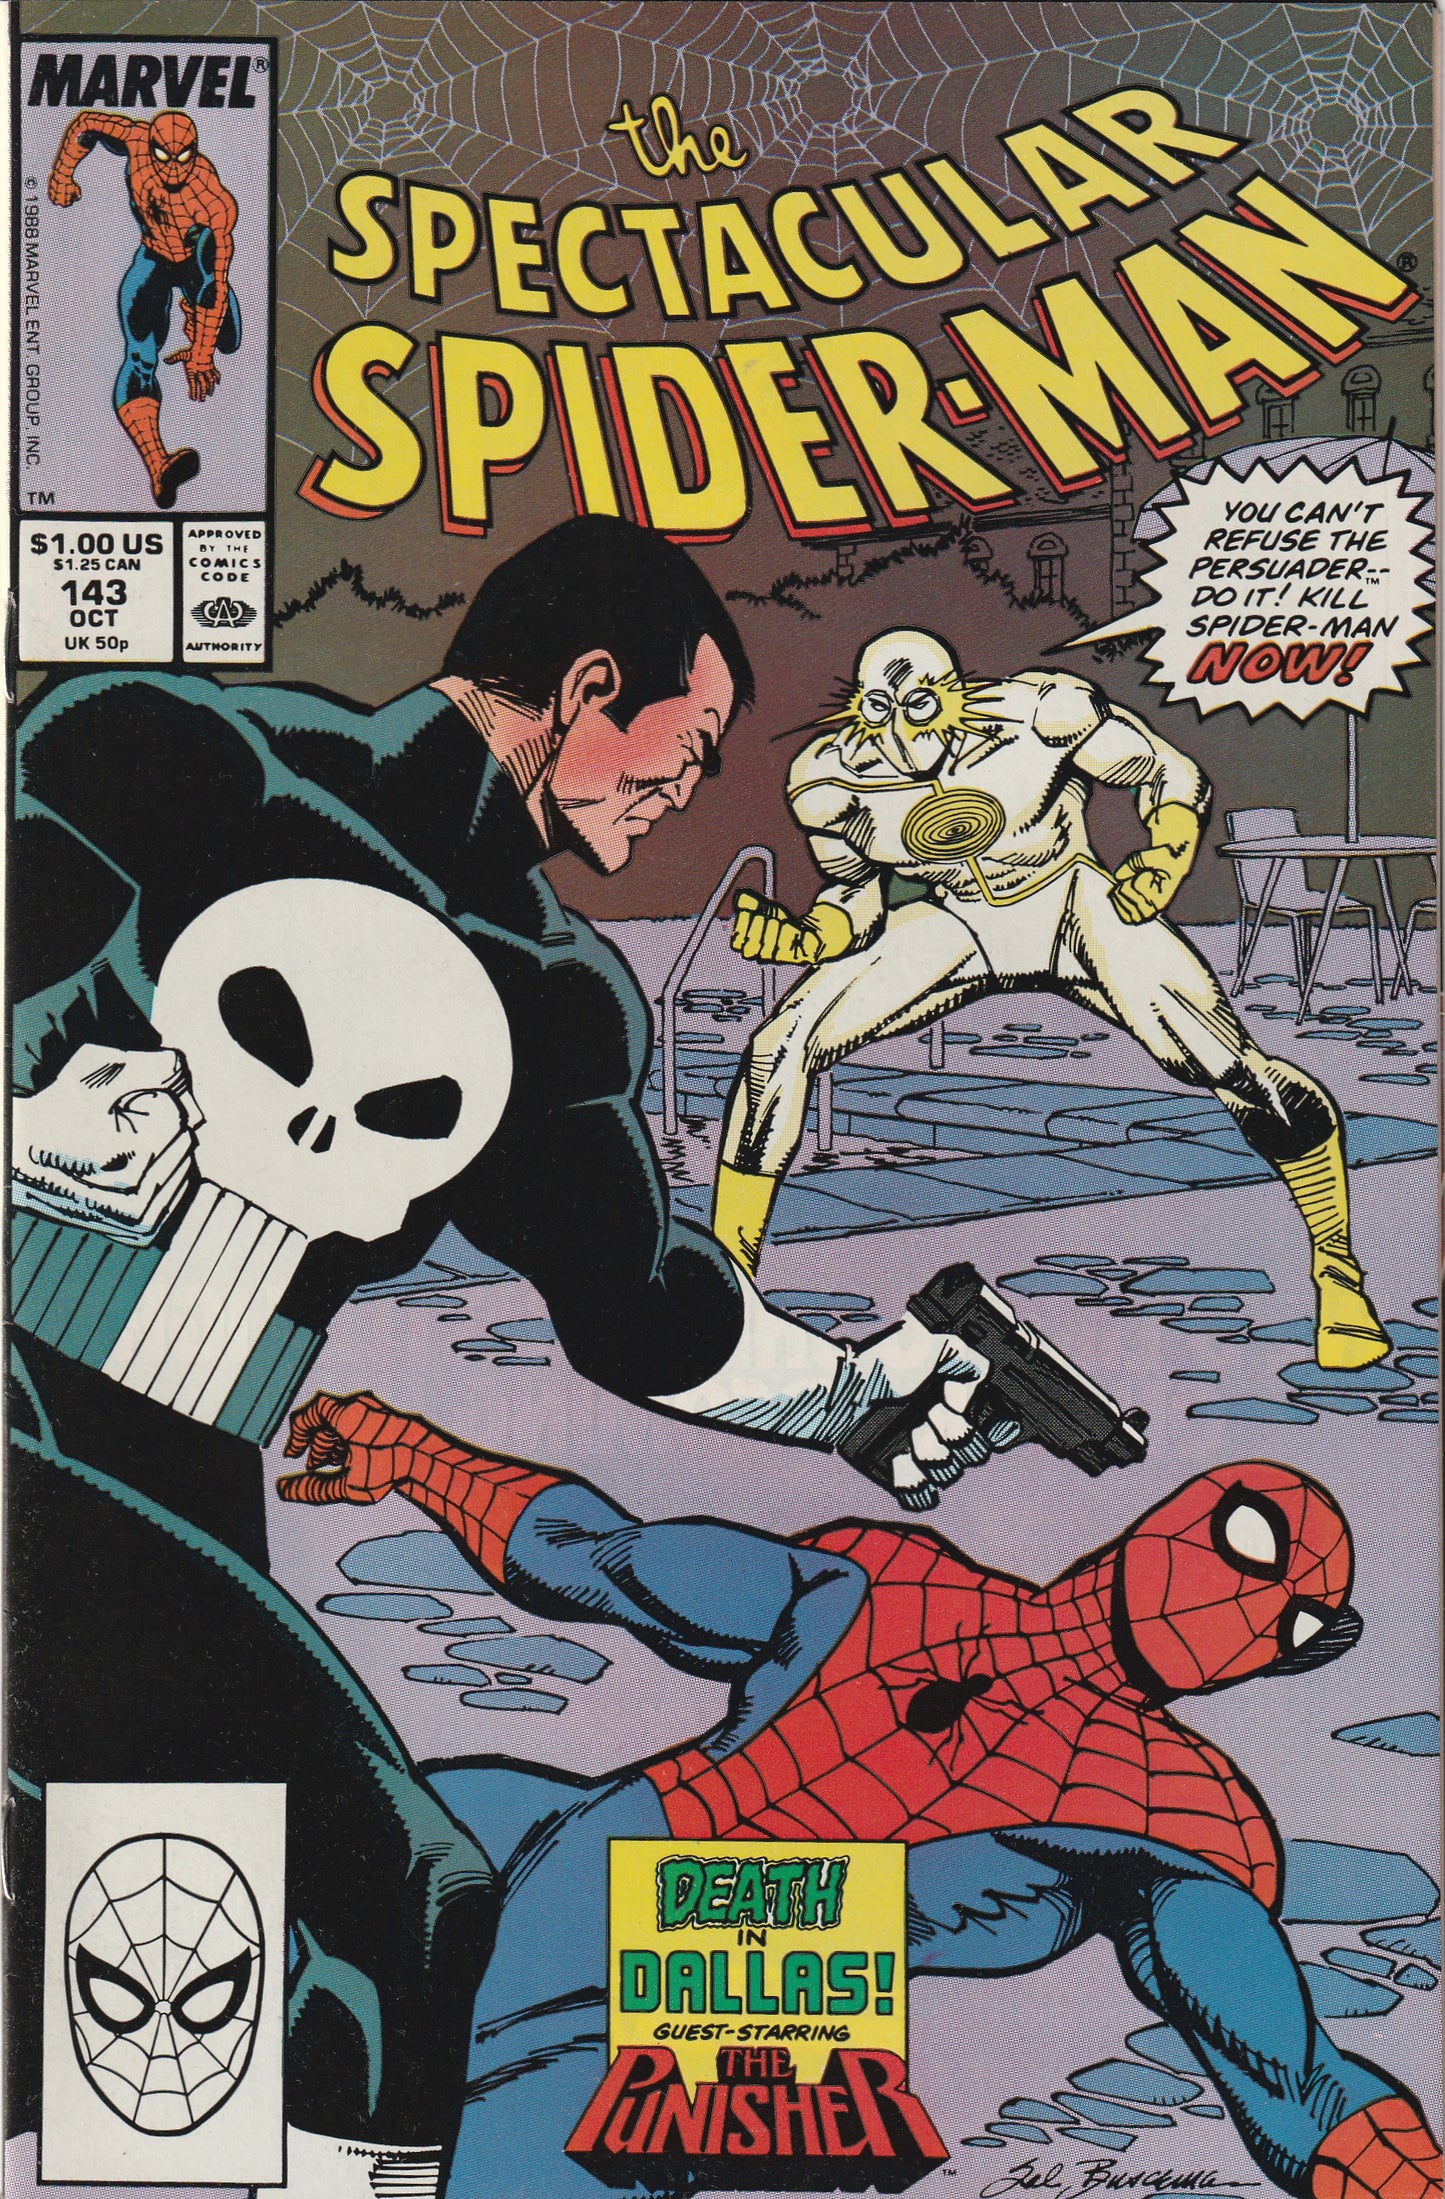 Spectacular Spider-Man #143 (1988) - Punisher appearance, 1st Appearance of Lobo Brothers